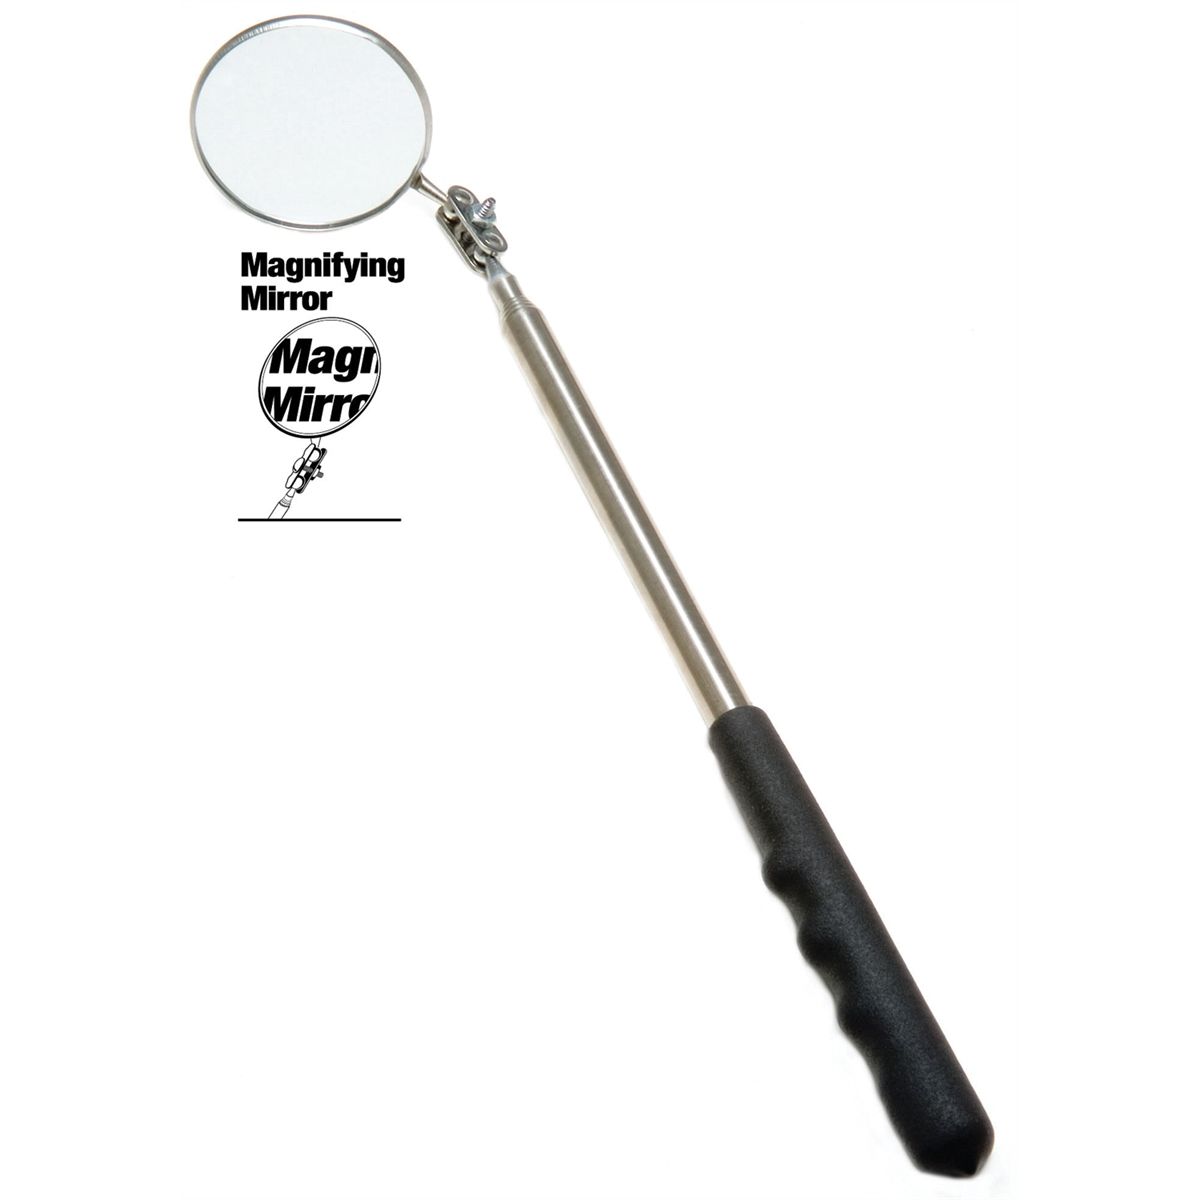 2 Pieces Telescoping Inspection Mirror Eyelash Inspection Mirror Adjustable Extension Mirror Detachable Stainless Steel Mirrors for Observing Small Details Beauty Tools Extends up to 28 Inch